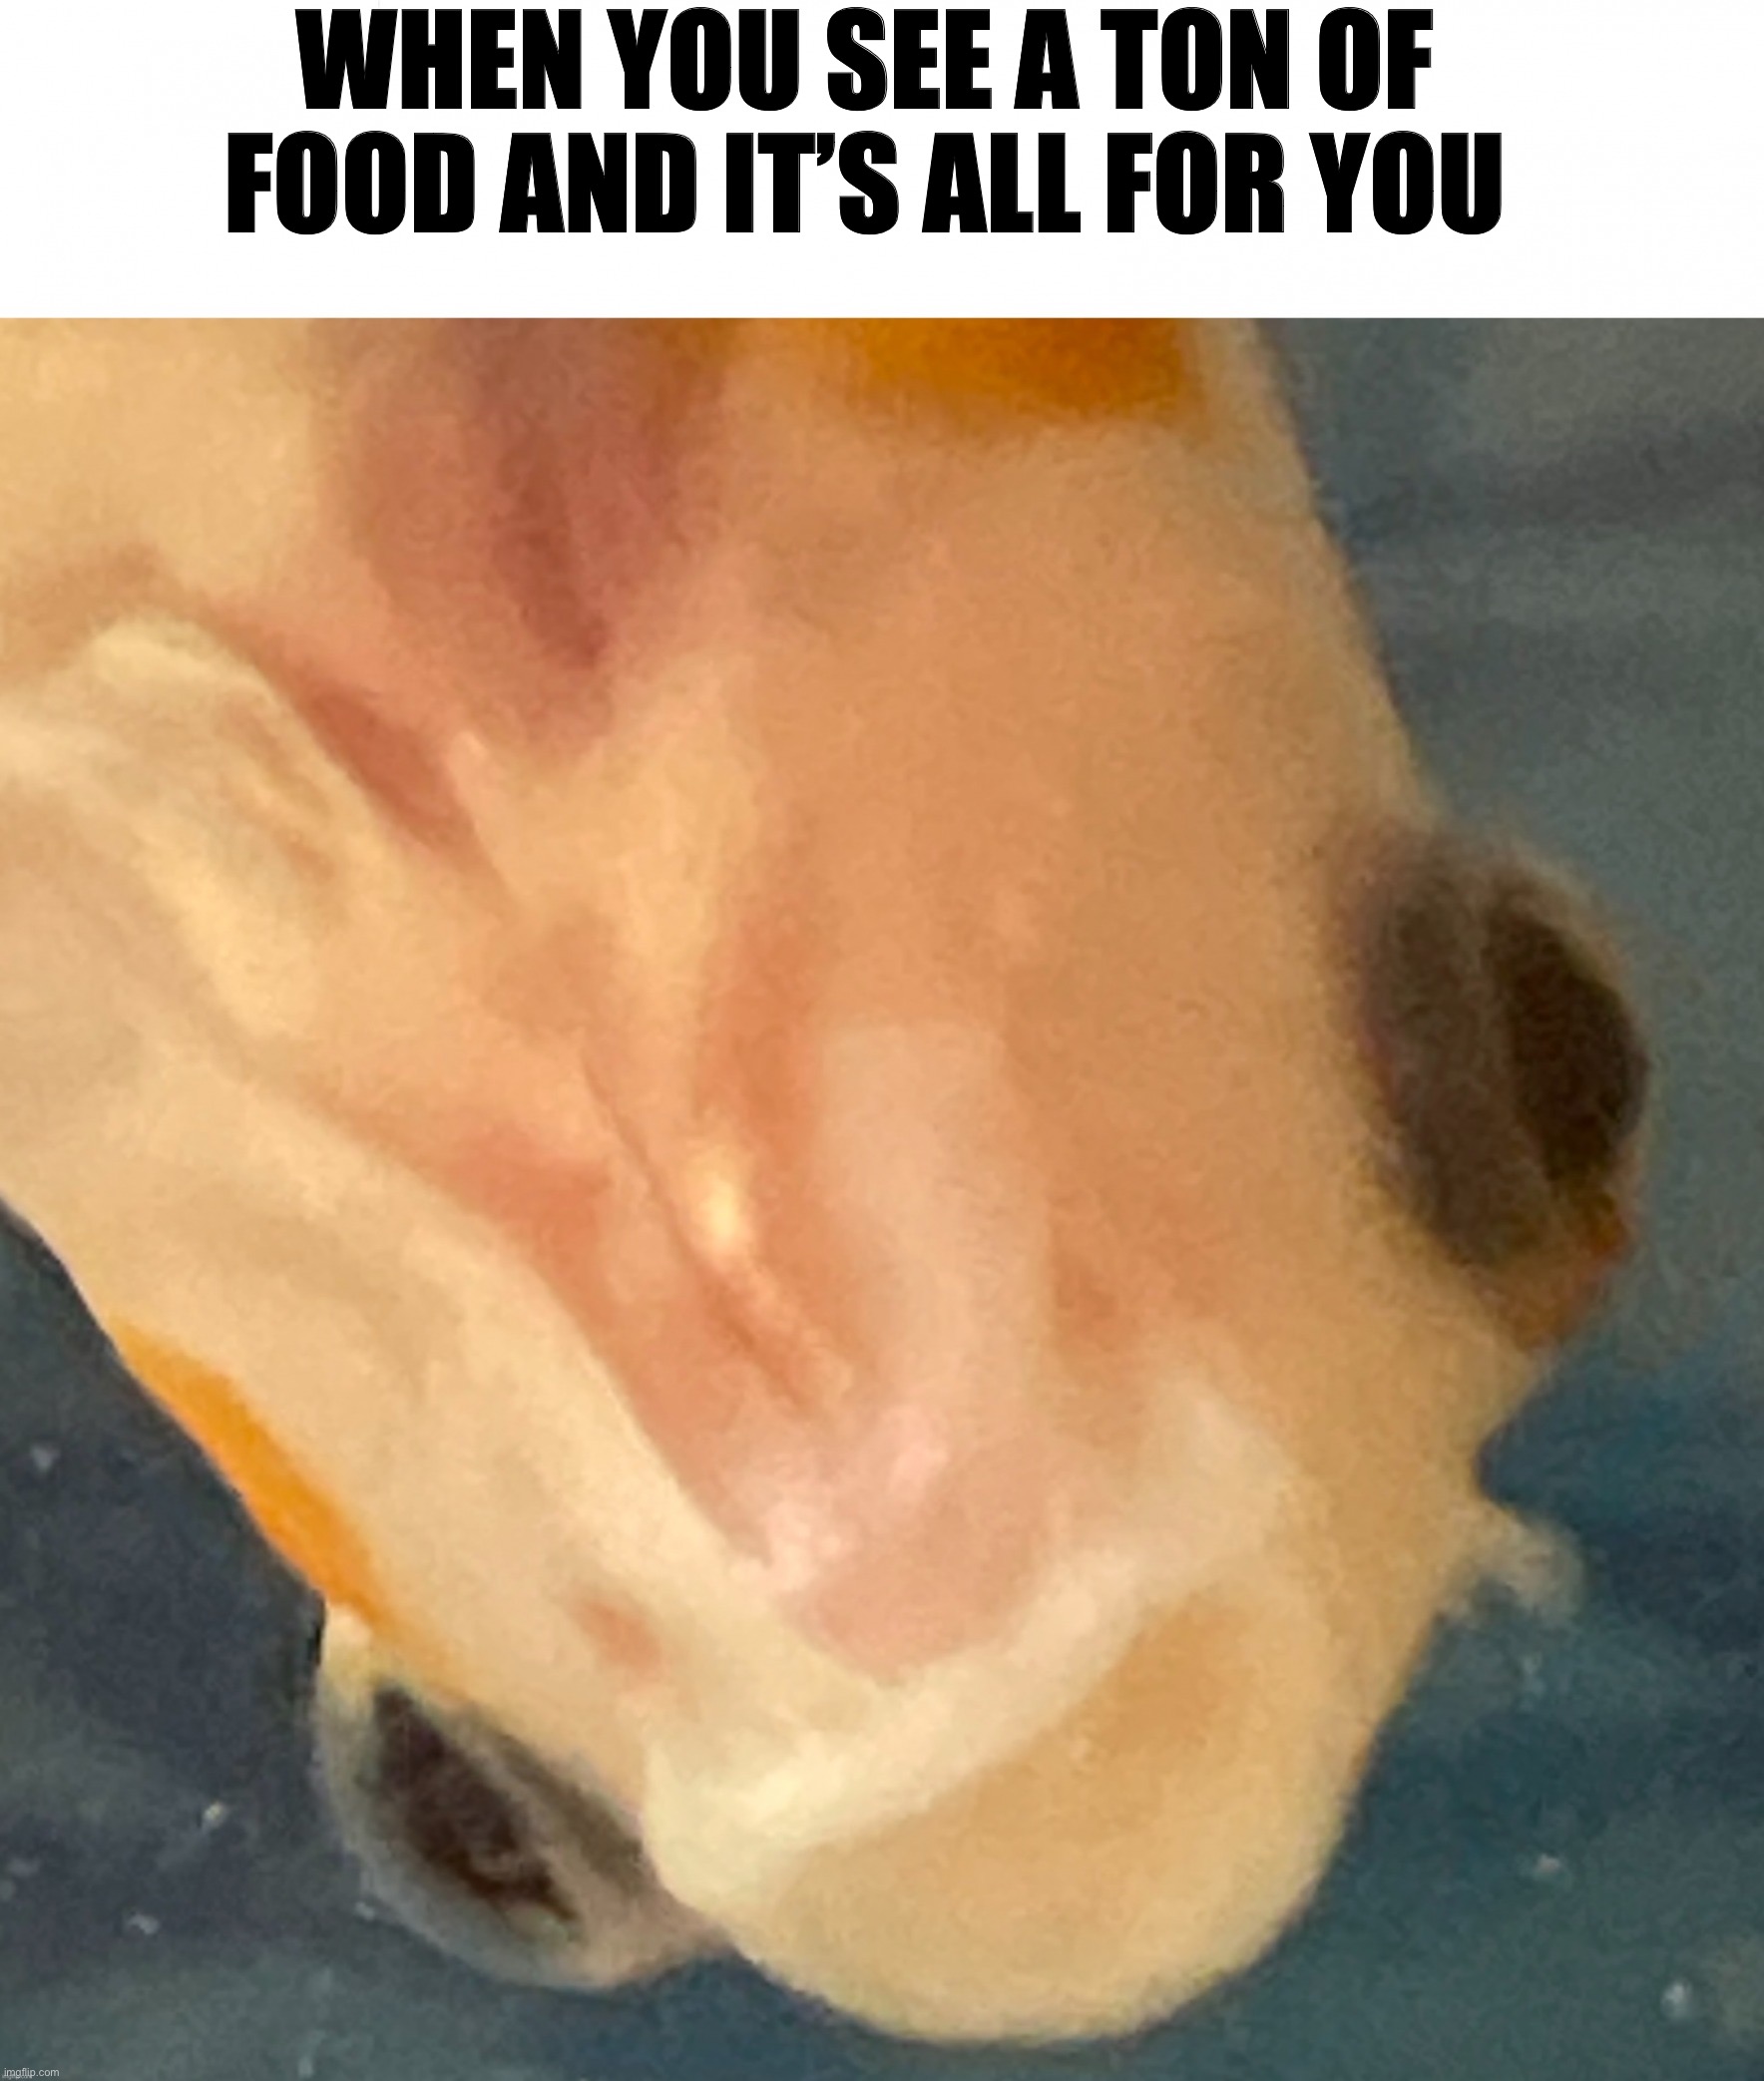 This is Yuki CONSTANTLY | WHEN YOU SEE A TON OF FOOD AND IT’S ALL FOR YOU | image tagged in yuki surprised,goldfish,yuki,wholesome,fish | made w/ Imgflip meme maker